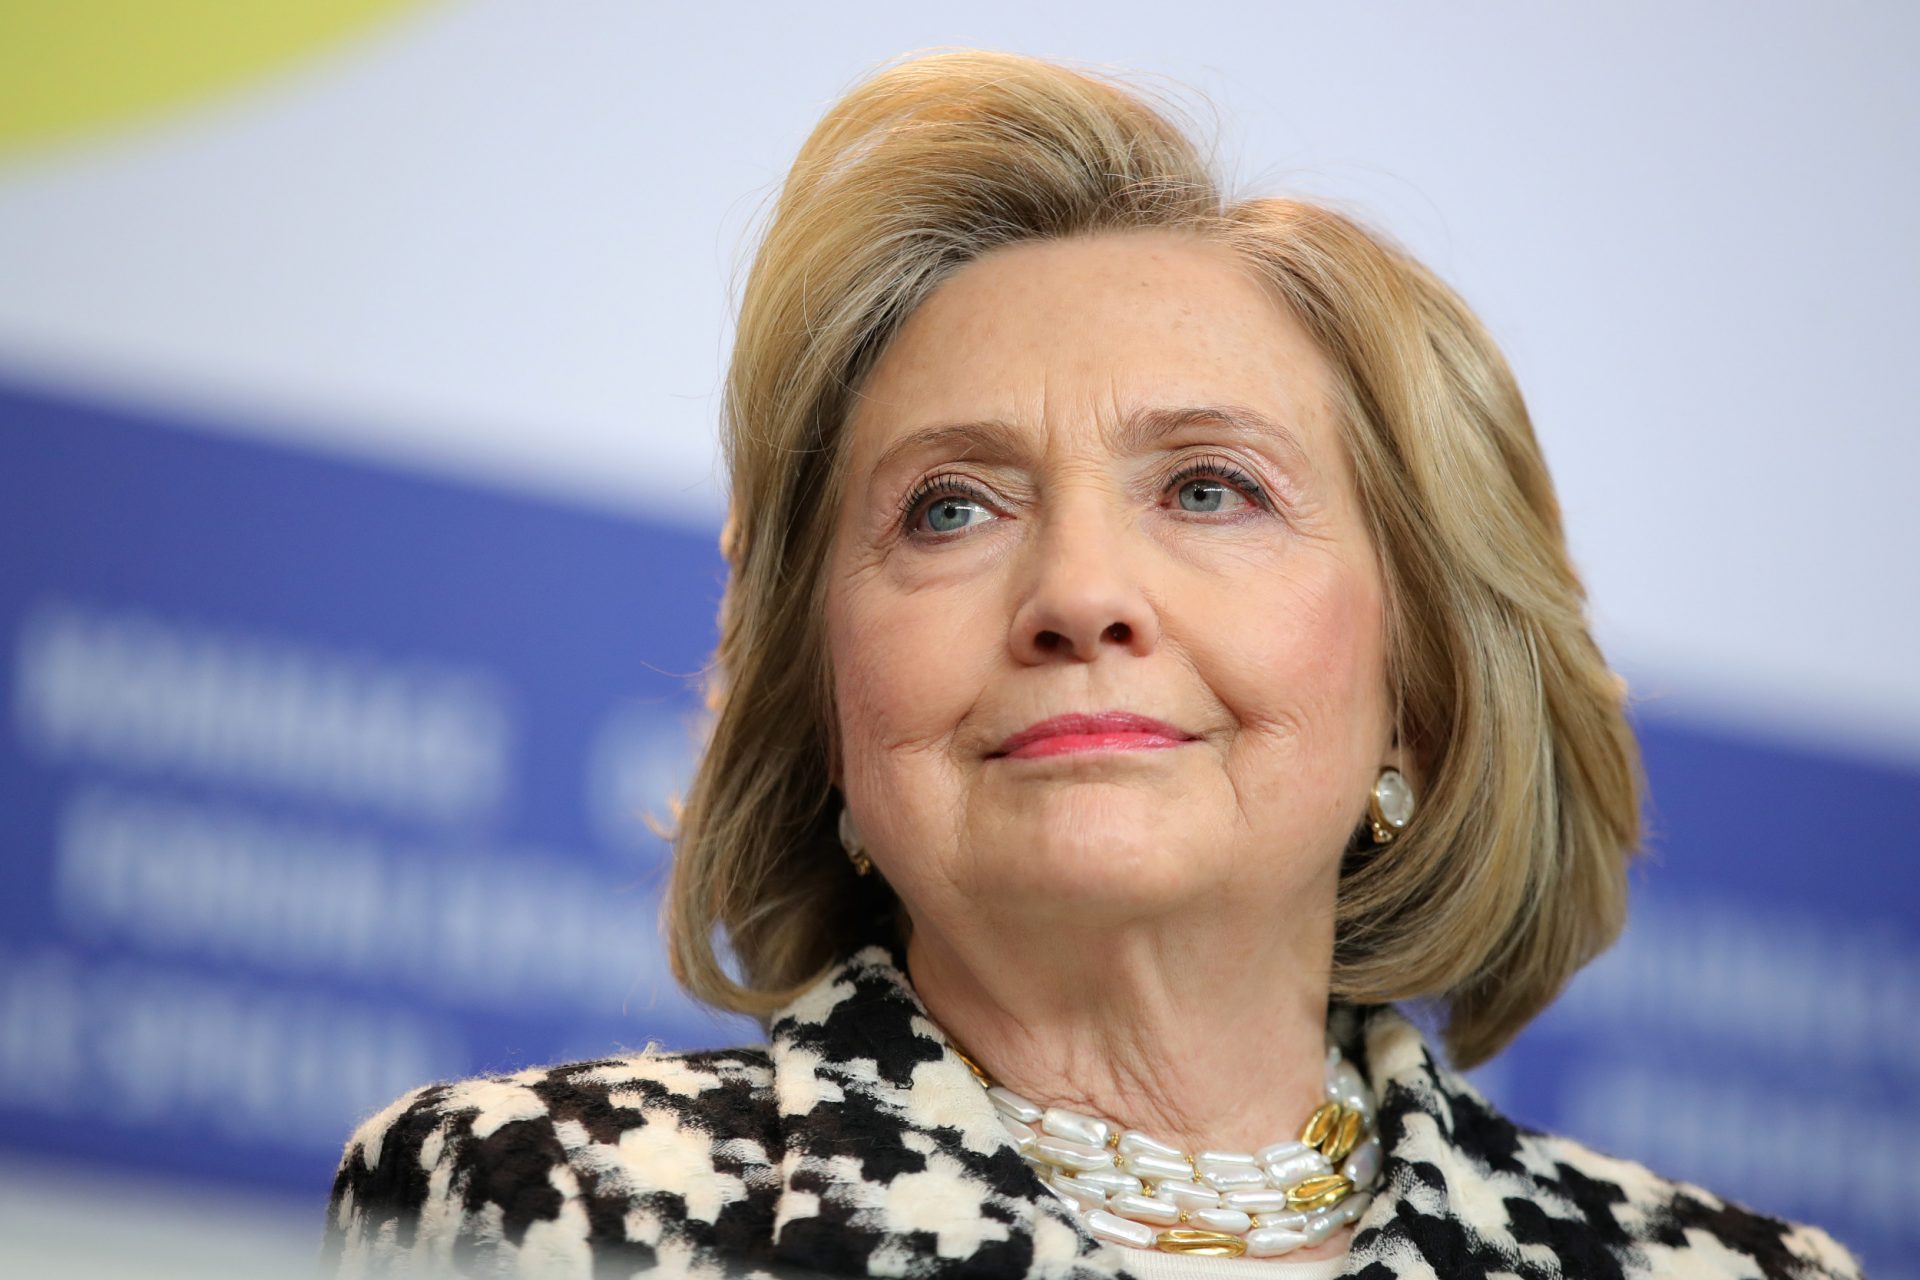 Hillary Clinton Asks Governments to ‘Rein In’ Disinformation on Social Media